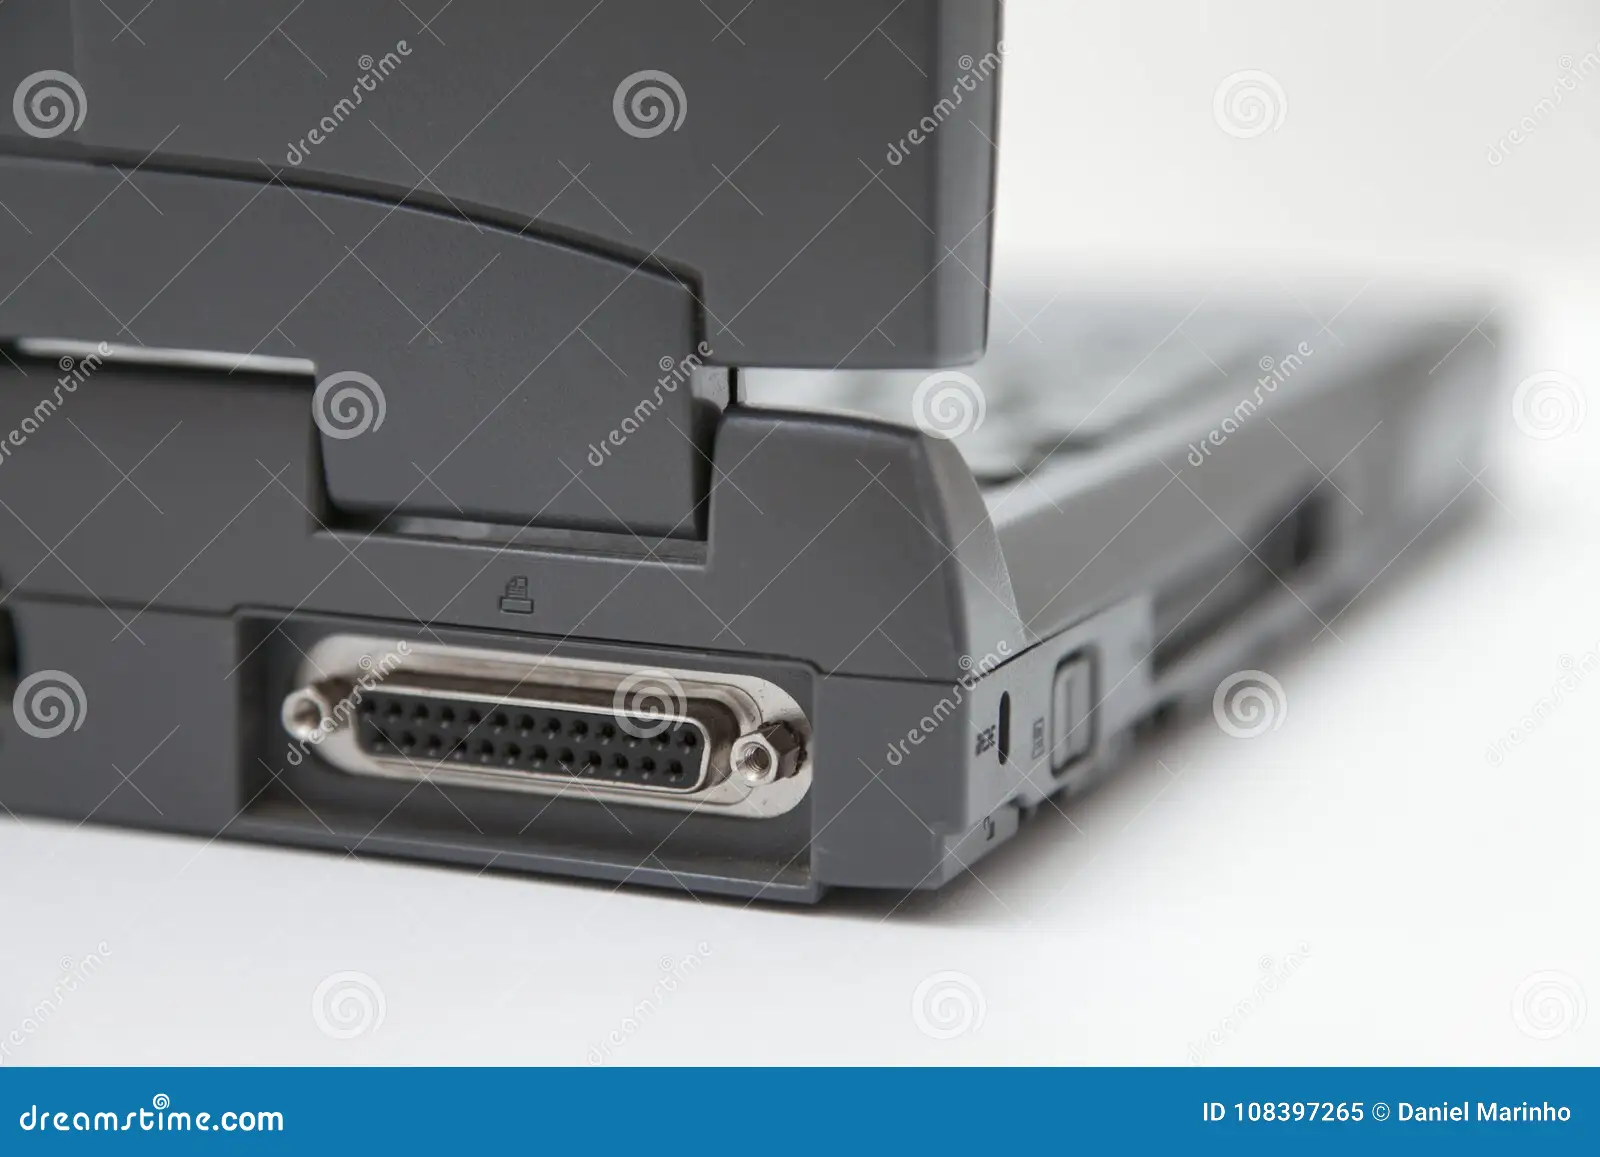 Laptop With Parallel Port